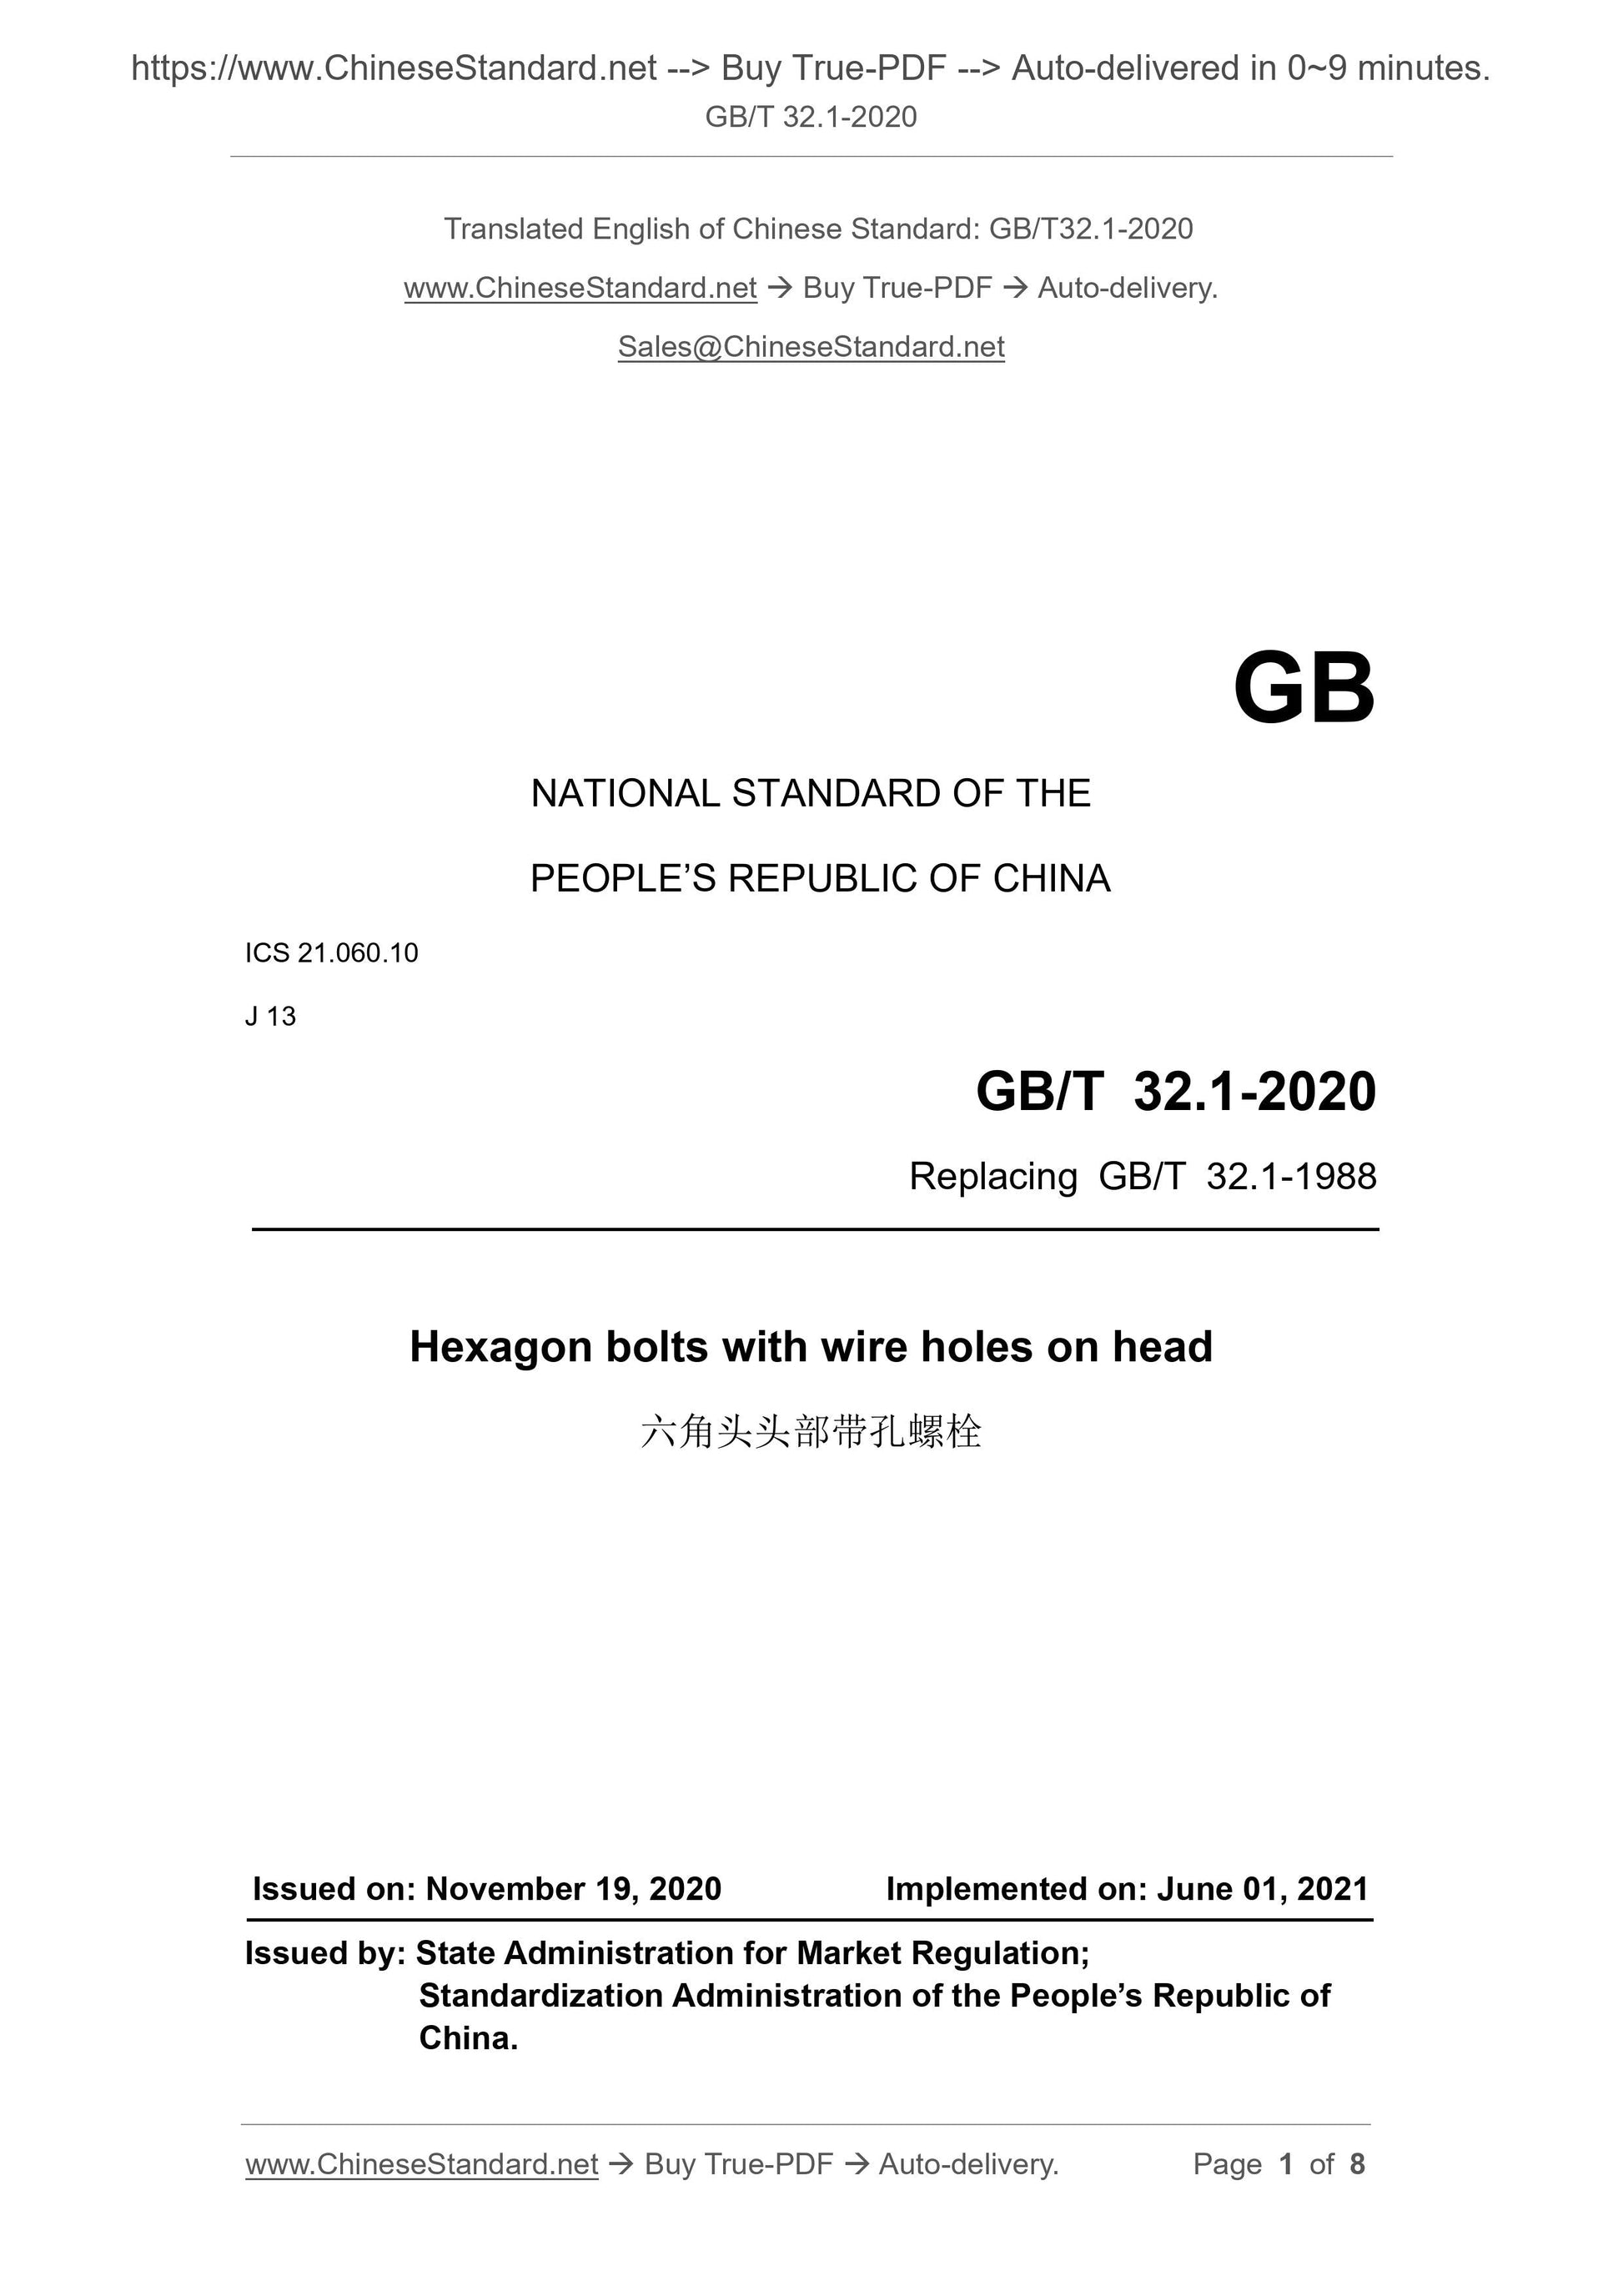 GB/T 32.1-2020 Page 1